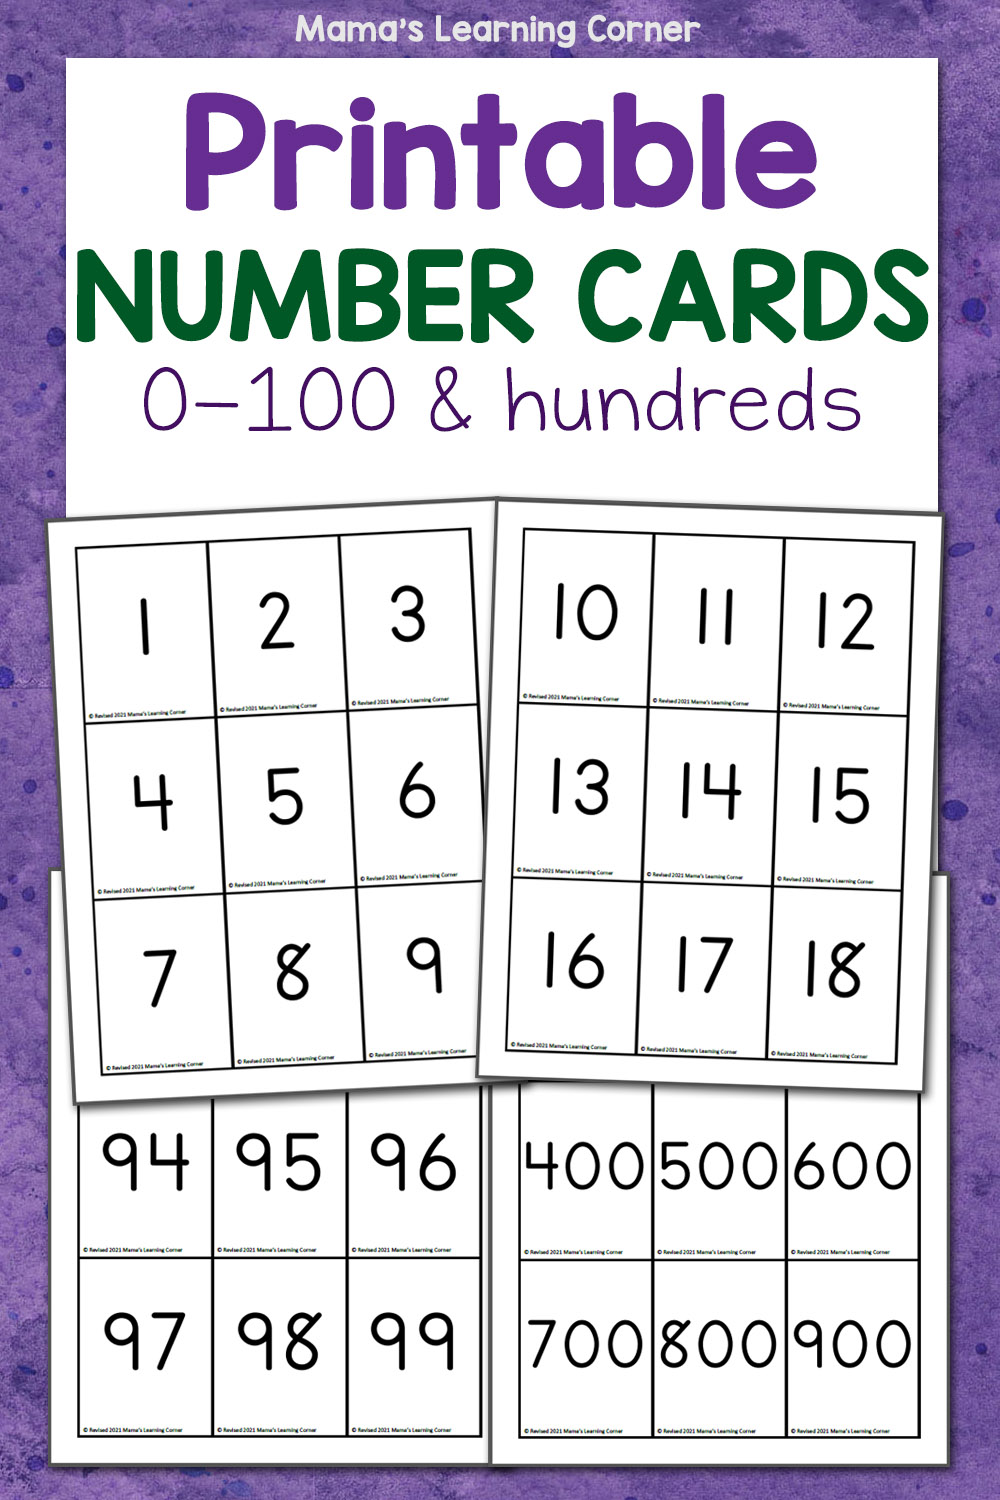 printable-number-cards-mamas-learning-corner